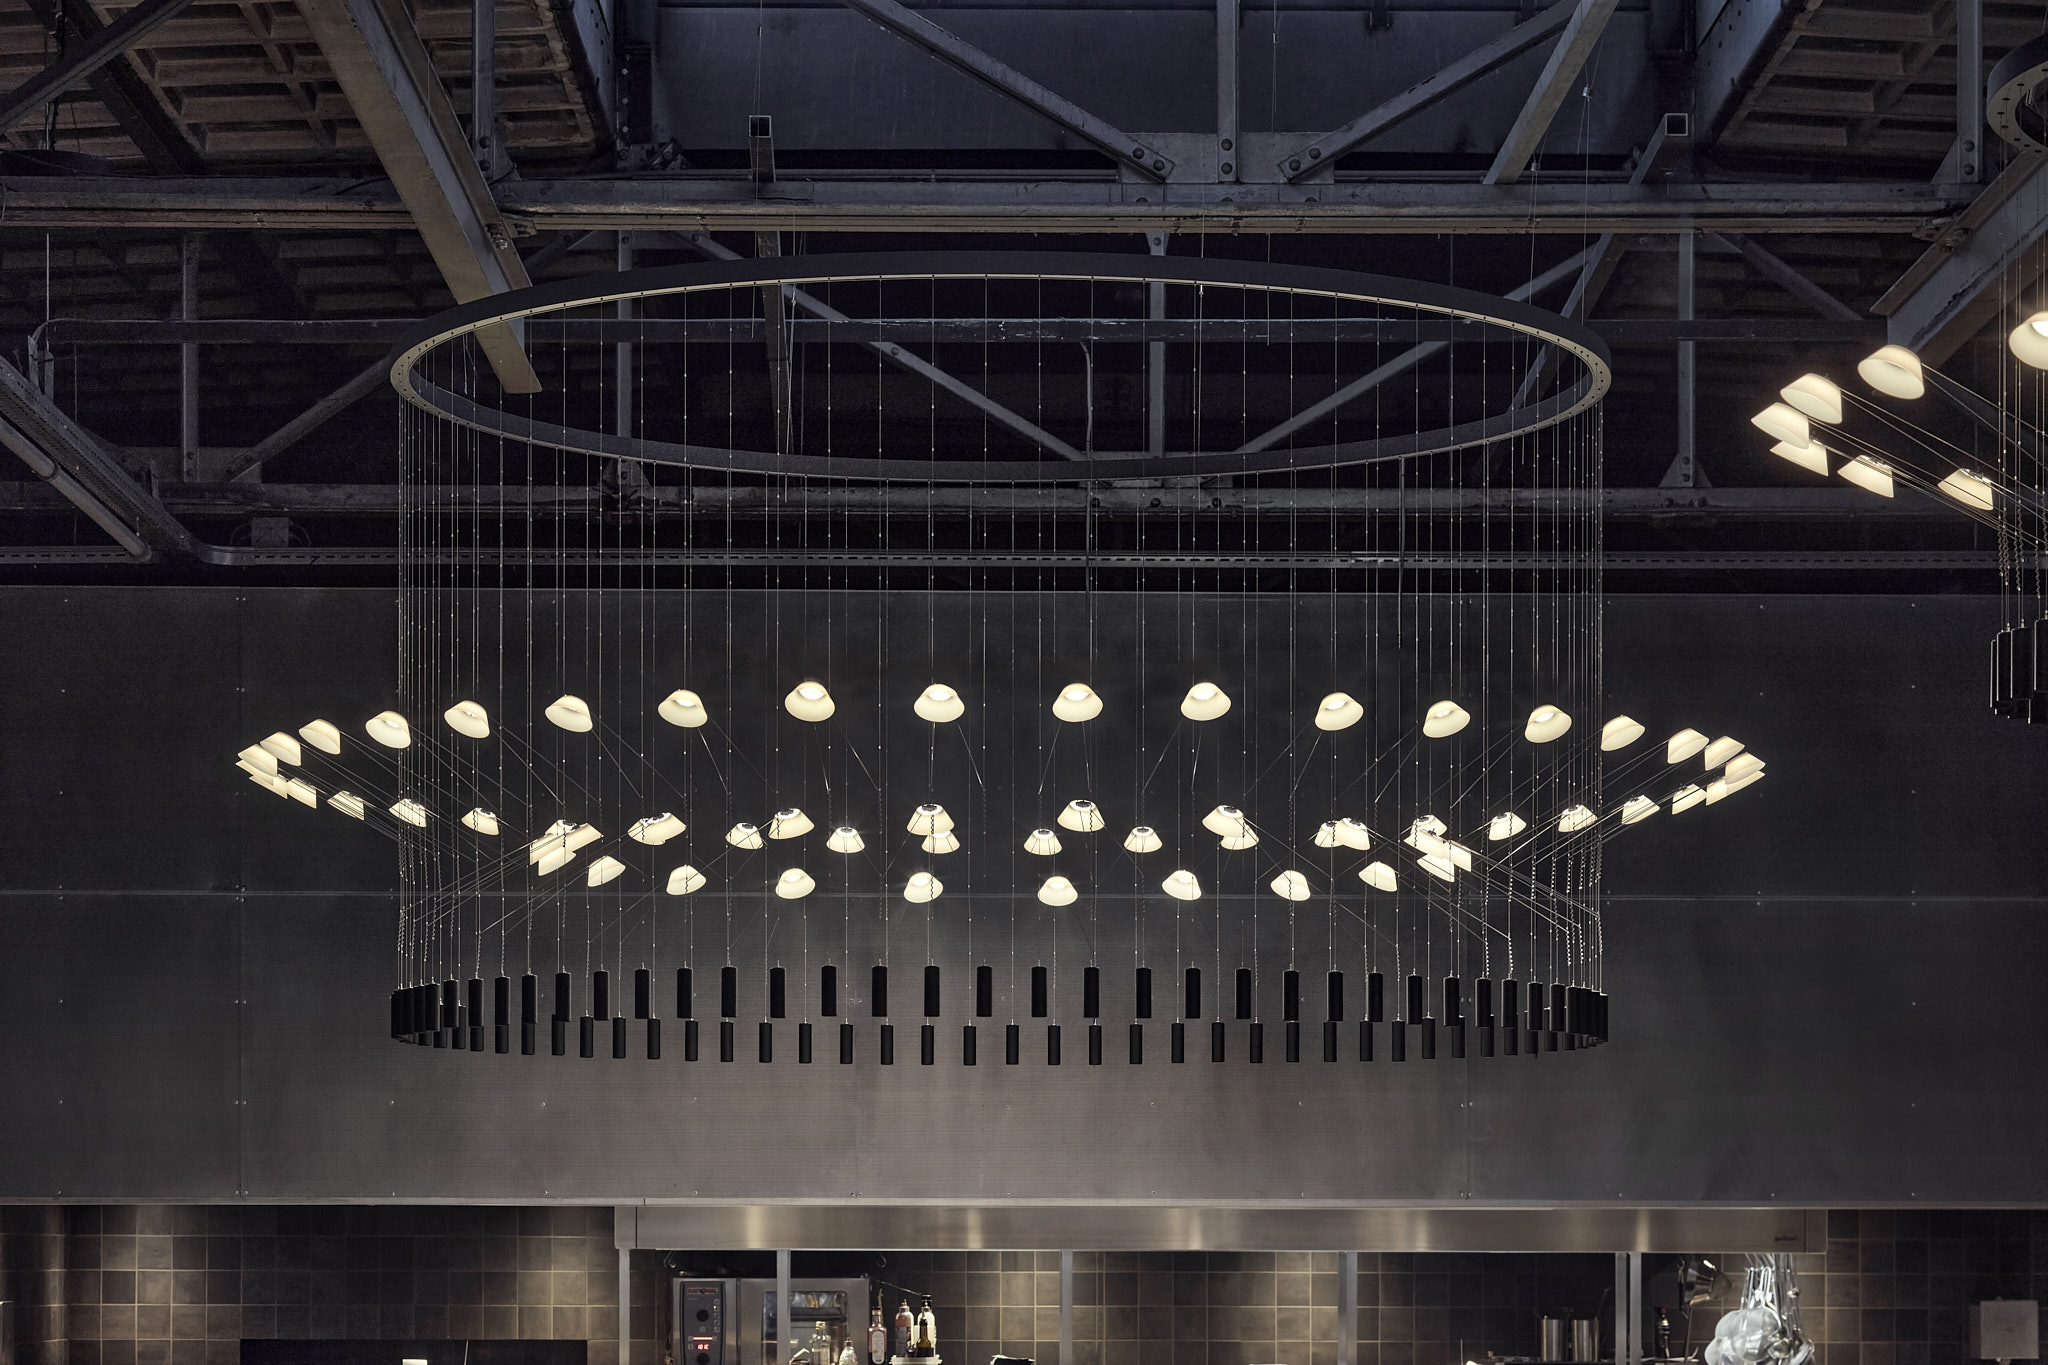 Ceiling lamp at Kazerne, Eindhoven. Lightweight structure, which exists out of various LED lights. Designed by VANTOT.